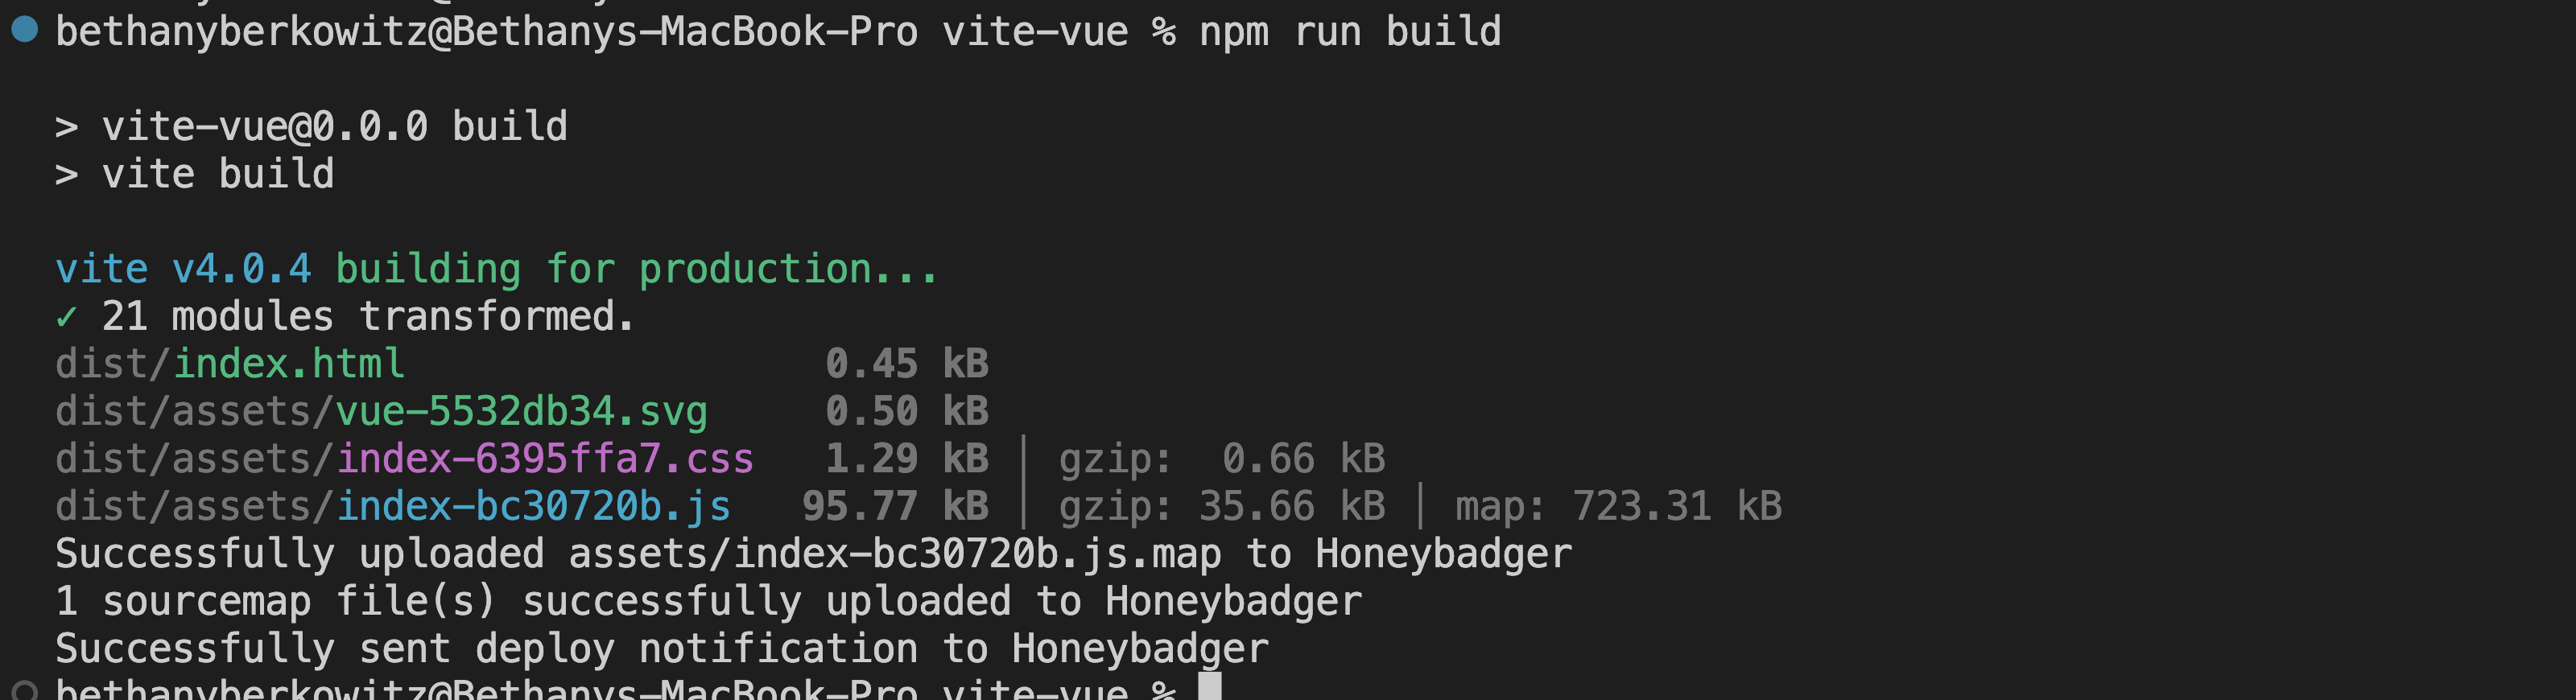 Terminal output: Successfully uploaded assets/index-bc30720b.js.map to Honeybadger